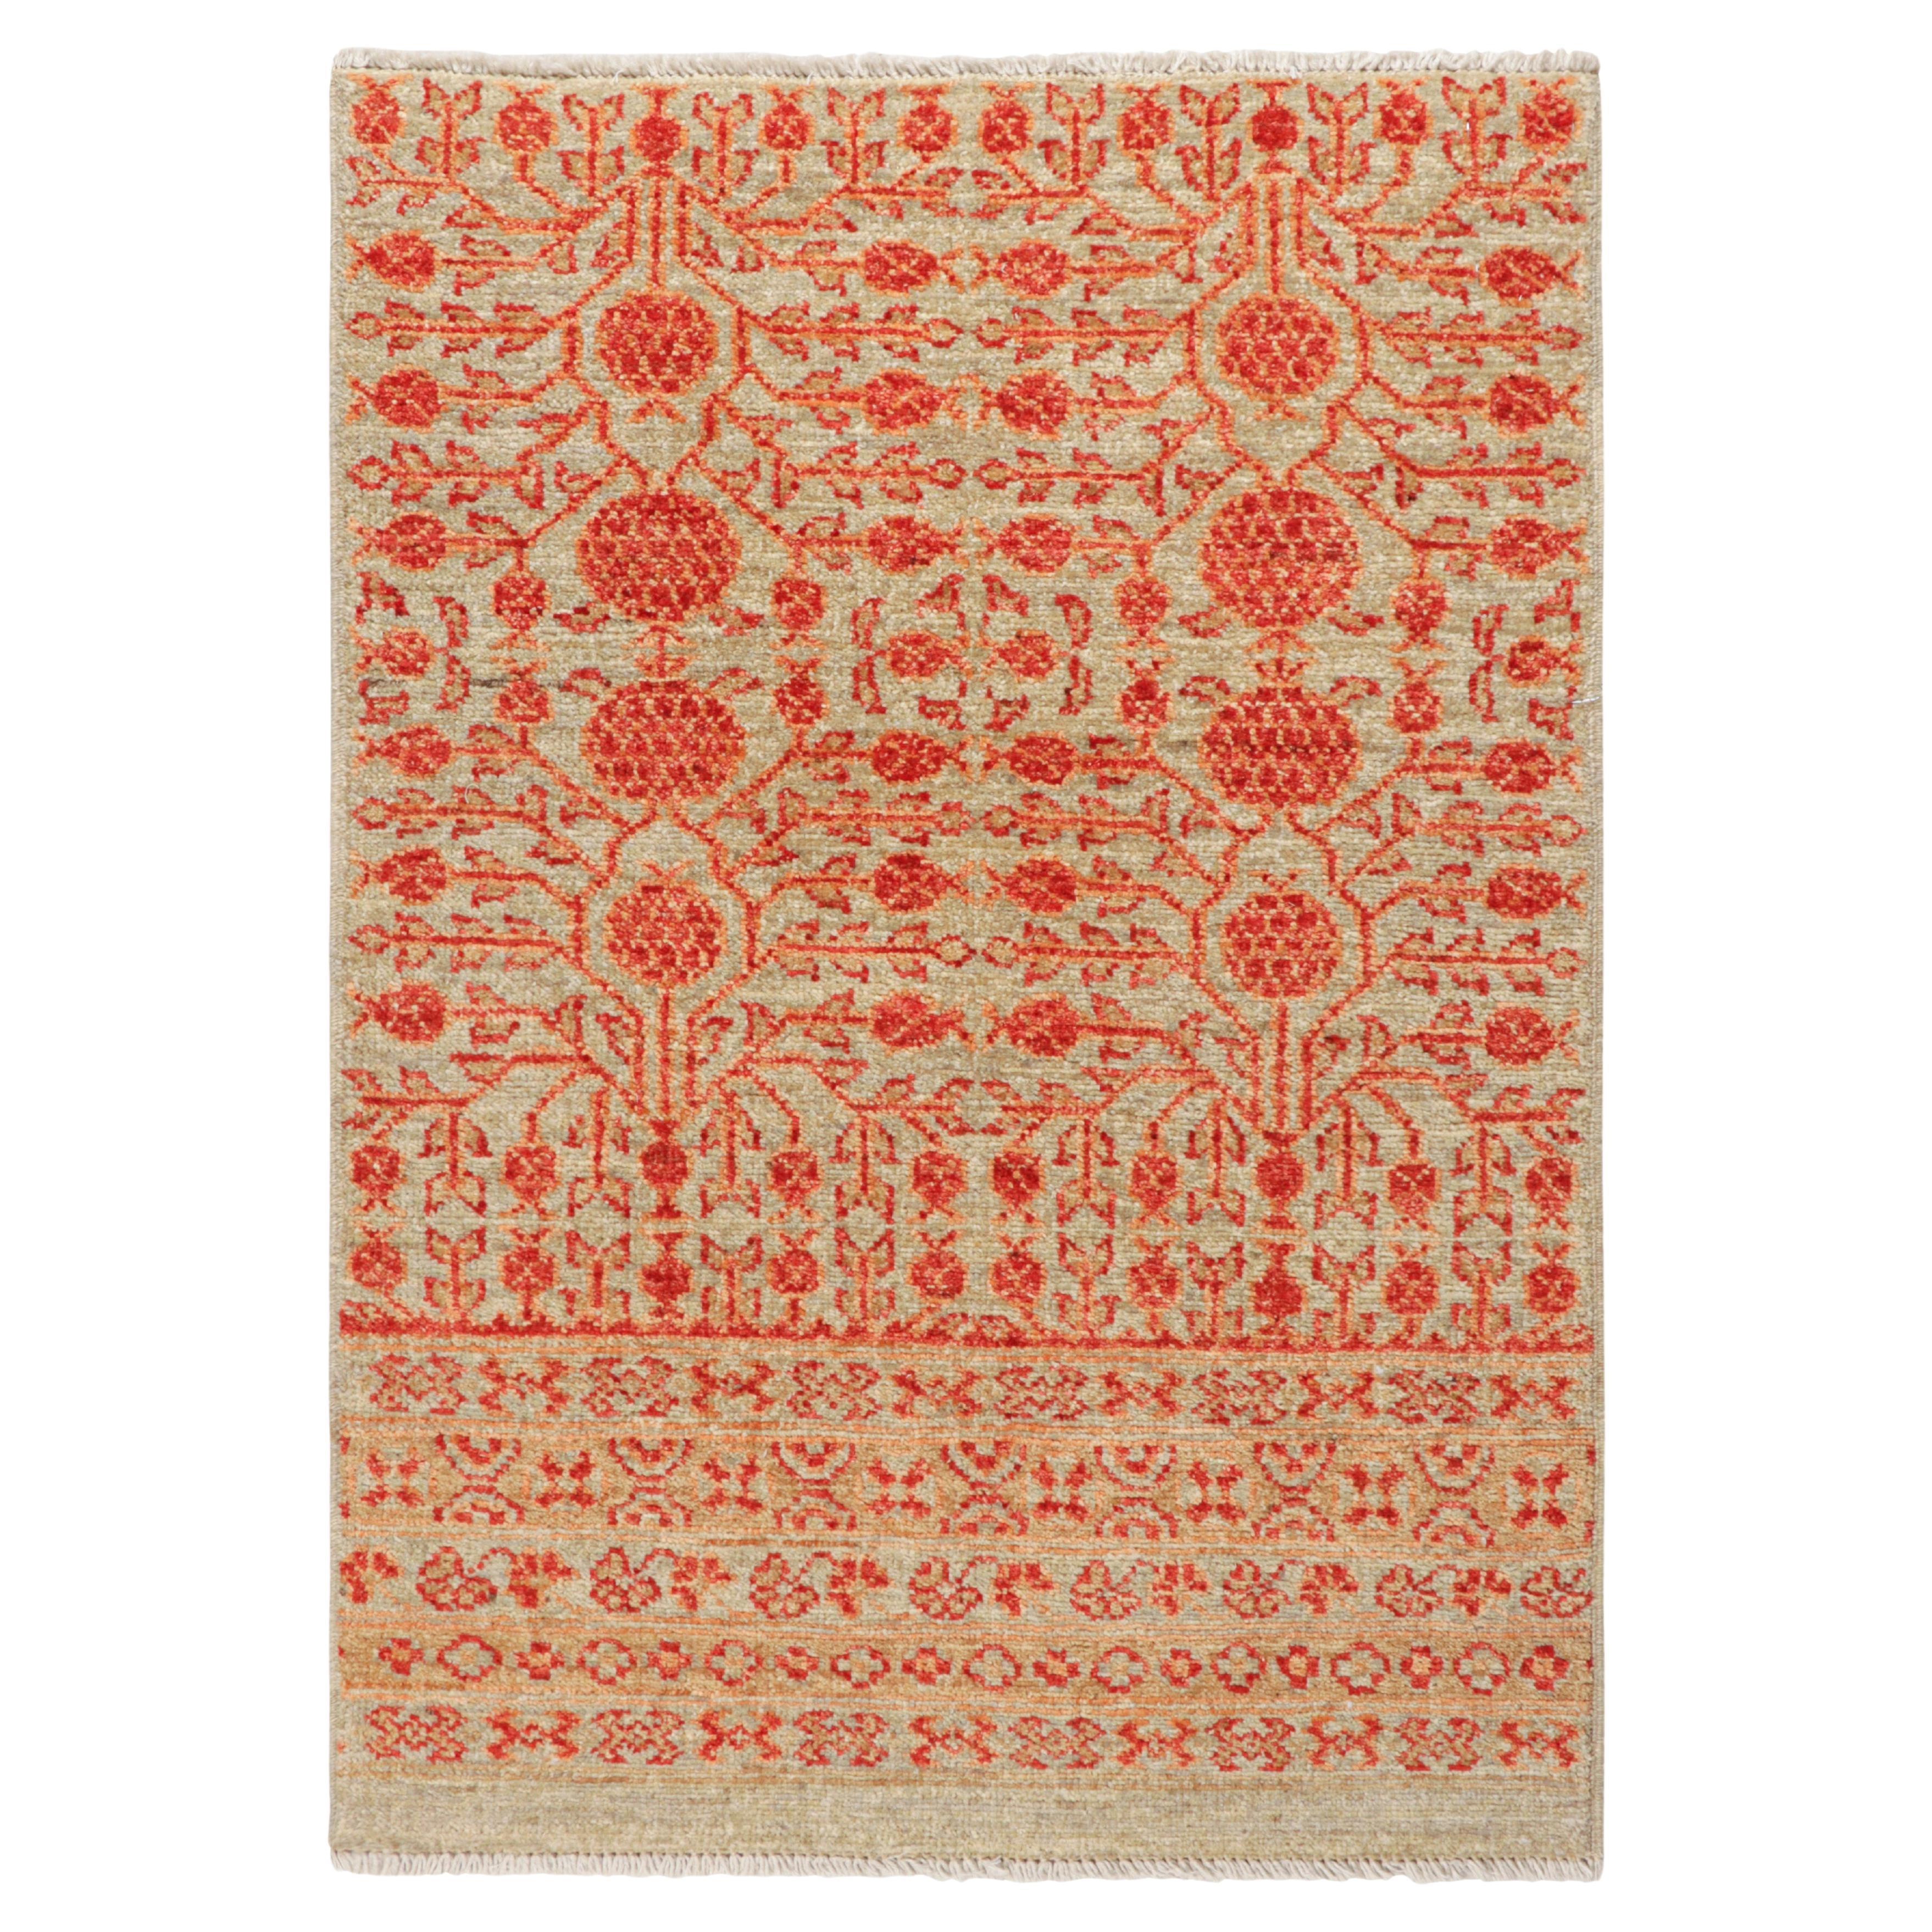 Rug & Kilim’s Khotan Style Rug in Beige-Brown with Pomegranate Patterns